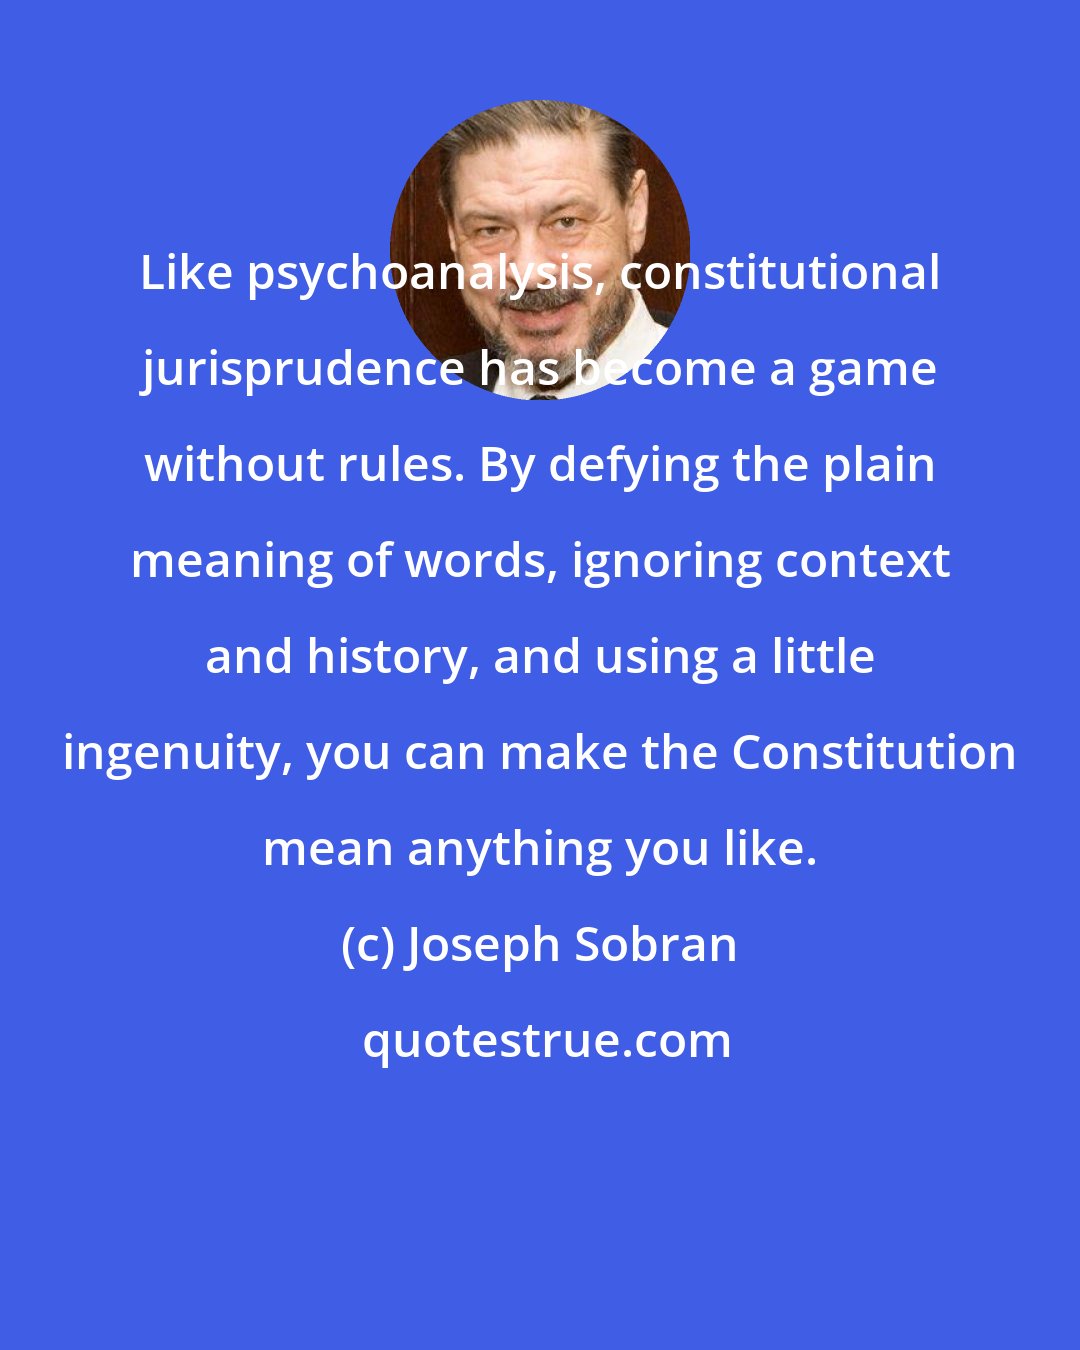 Joseph Sobran: Like psychoanalysis, constitutional jurisprudence has become a game without rules. By defying the plain meaning of words, ignoring context and history, and using a little ingenuity, you can make the Constitution mean anything you like.